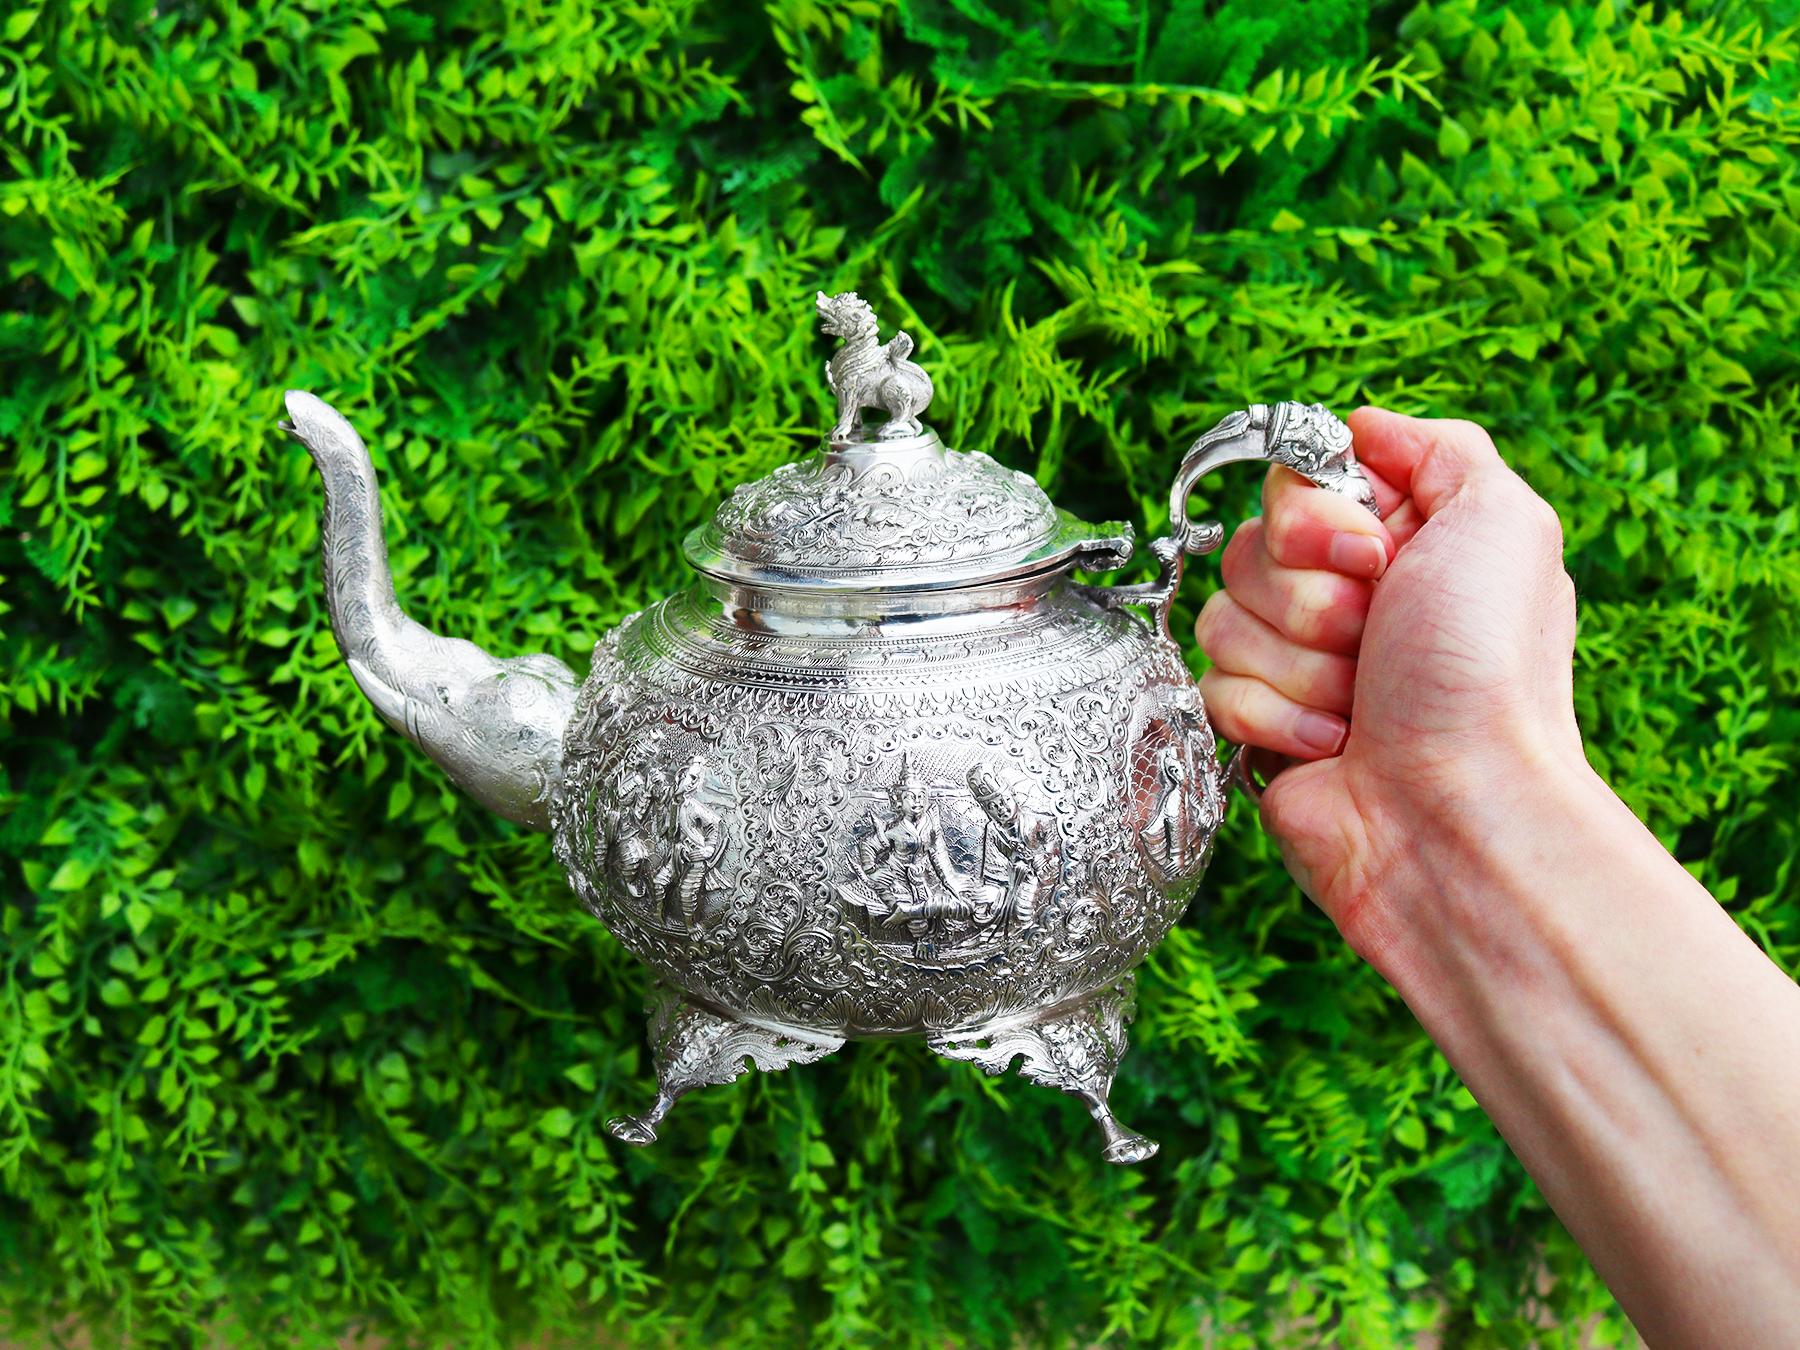 A exceptional, fine and impressive antique Indian silver three piece tea service; an addition to our diverse silver teaware collection.

This exceptional antique Indian silver tea set/service consists of a teapot, cream jug and sugar bowl.

Each